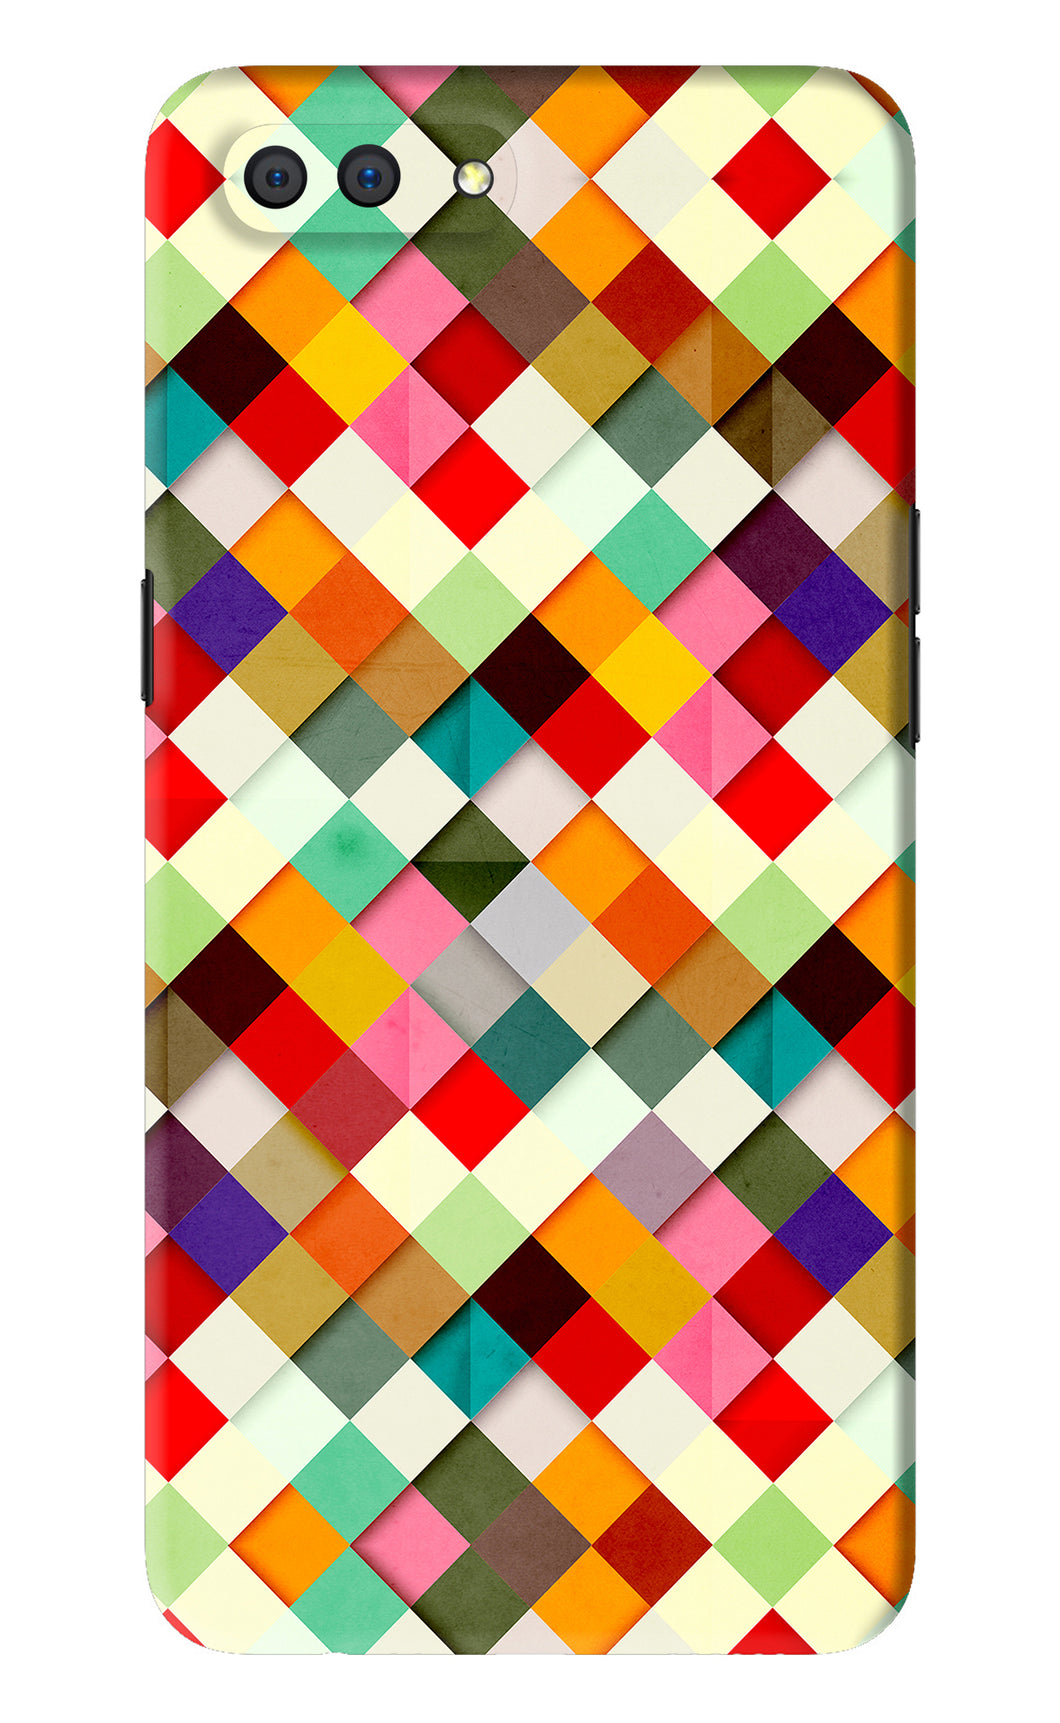 Geometric Abstract Colorful Realme C1 Back Skin Wrap